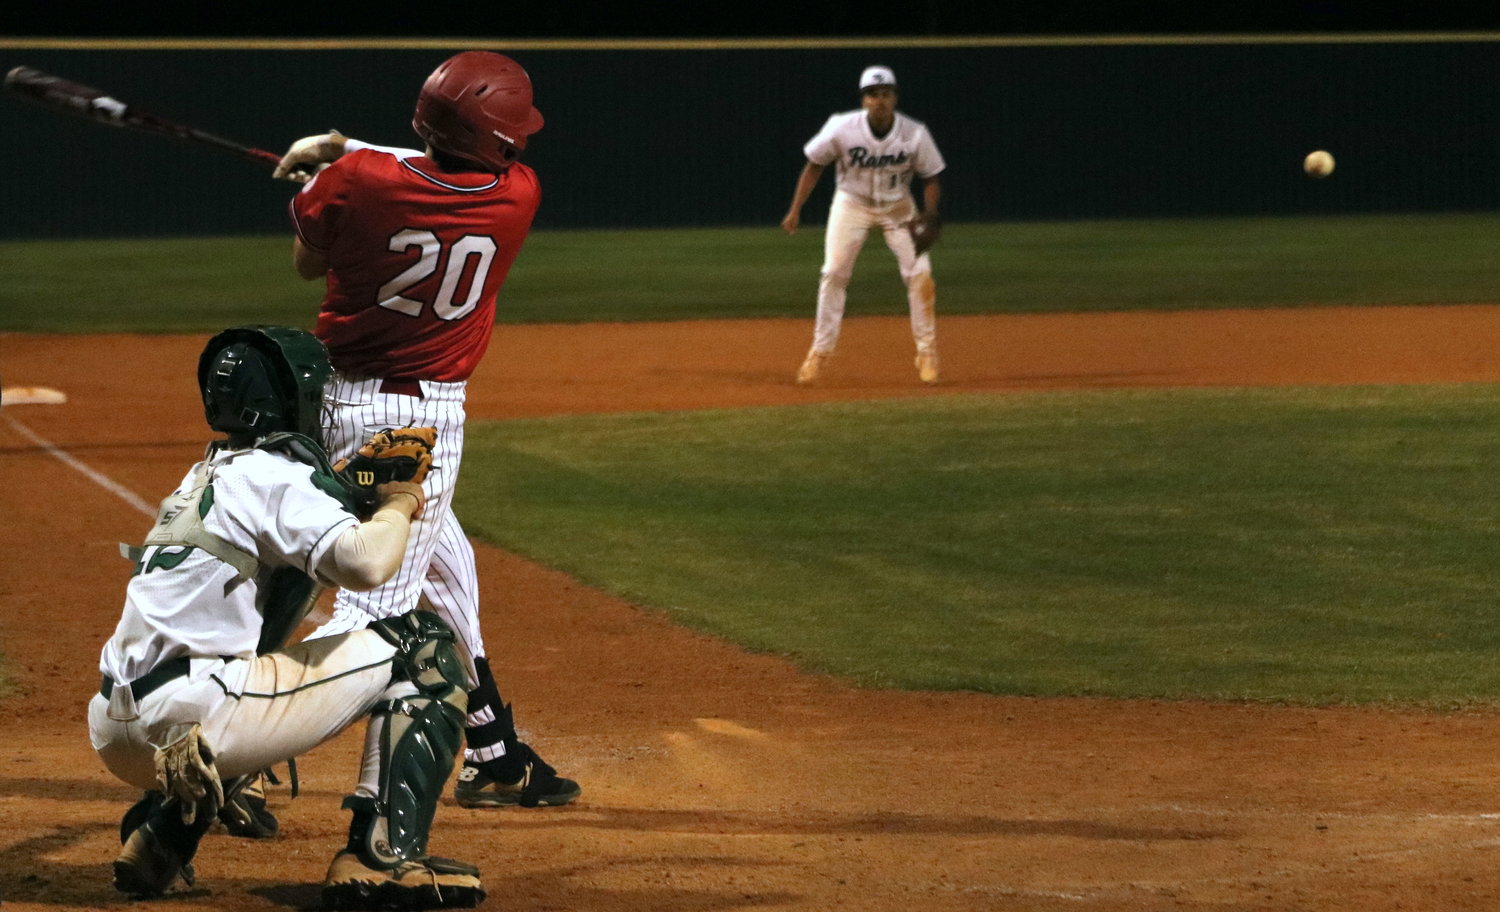 Sutton Hull hits a ball to left field during Tuesday’s game between Katy and Mayde Creek at the Mayde Creek baseball field.